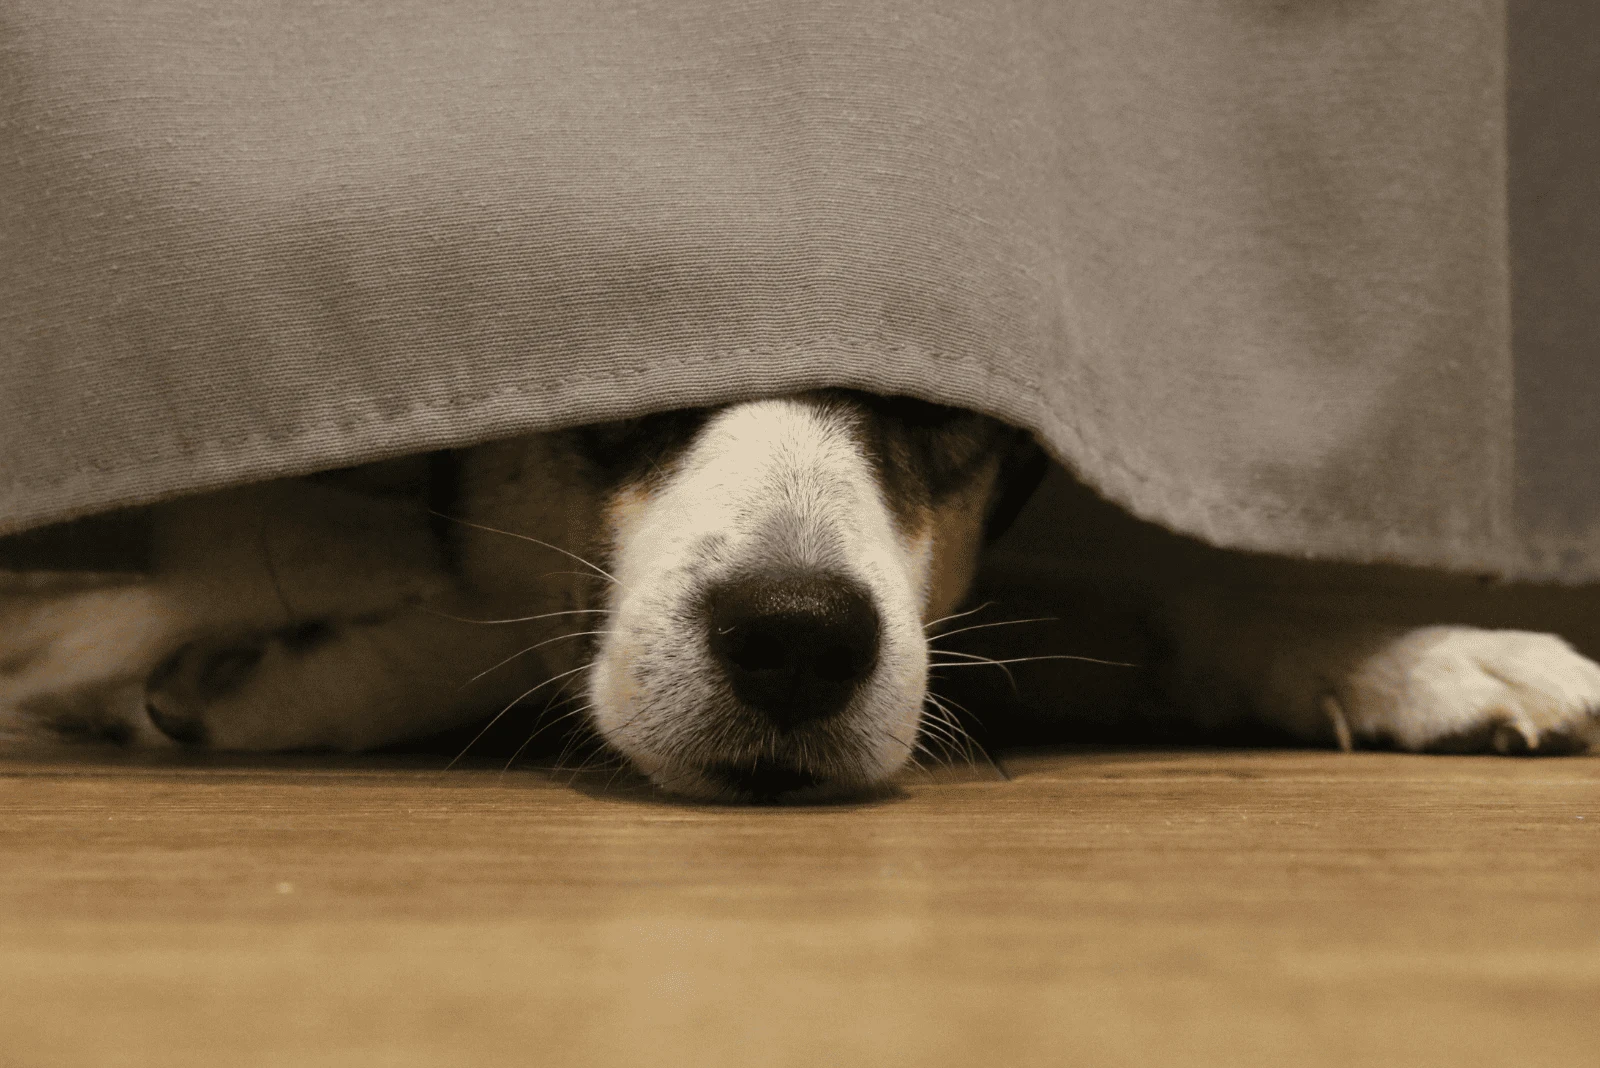 the dog peeks out from under the bed